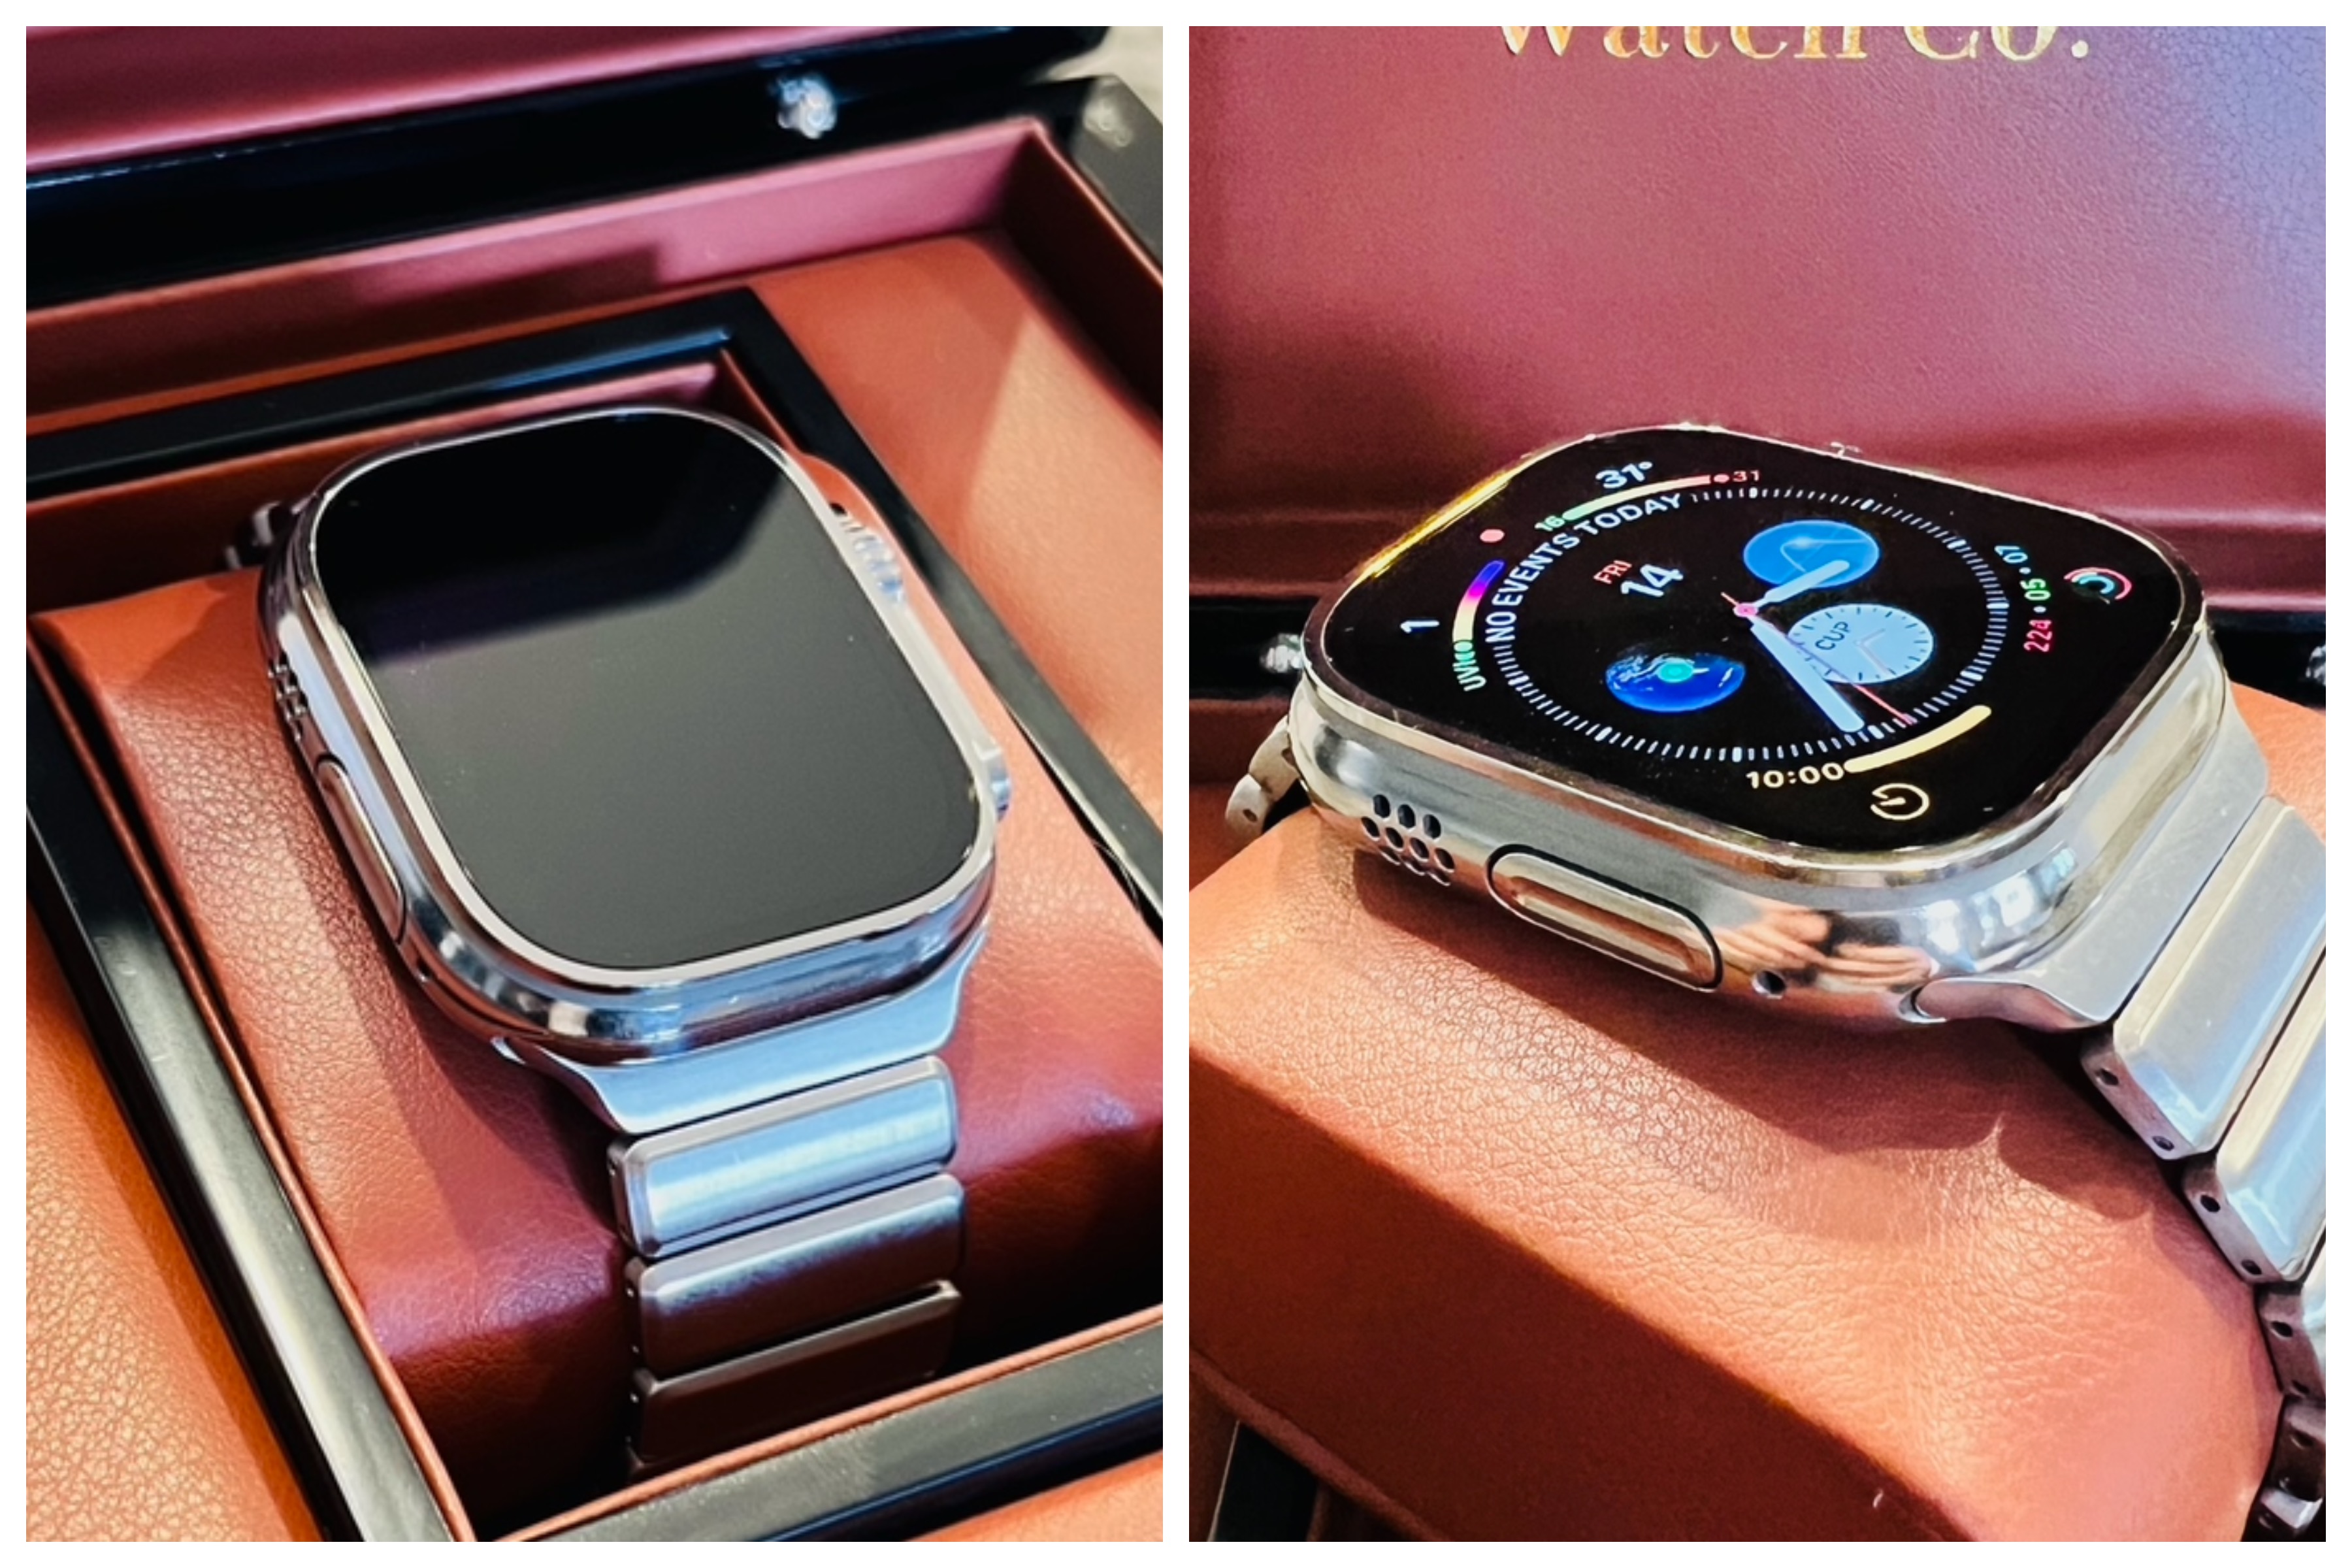 Apple Watch Ultra now comes in a fancy, shiny design — if you’re